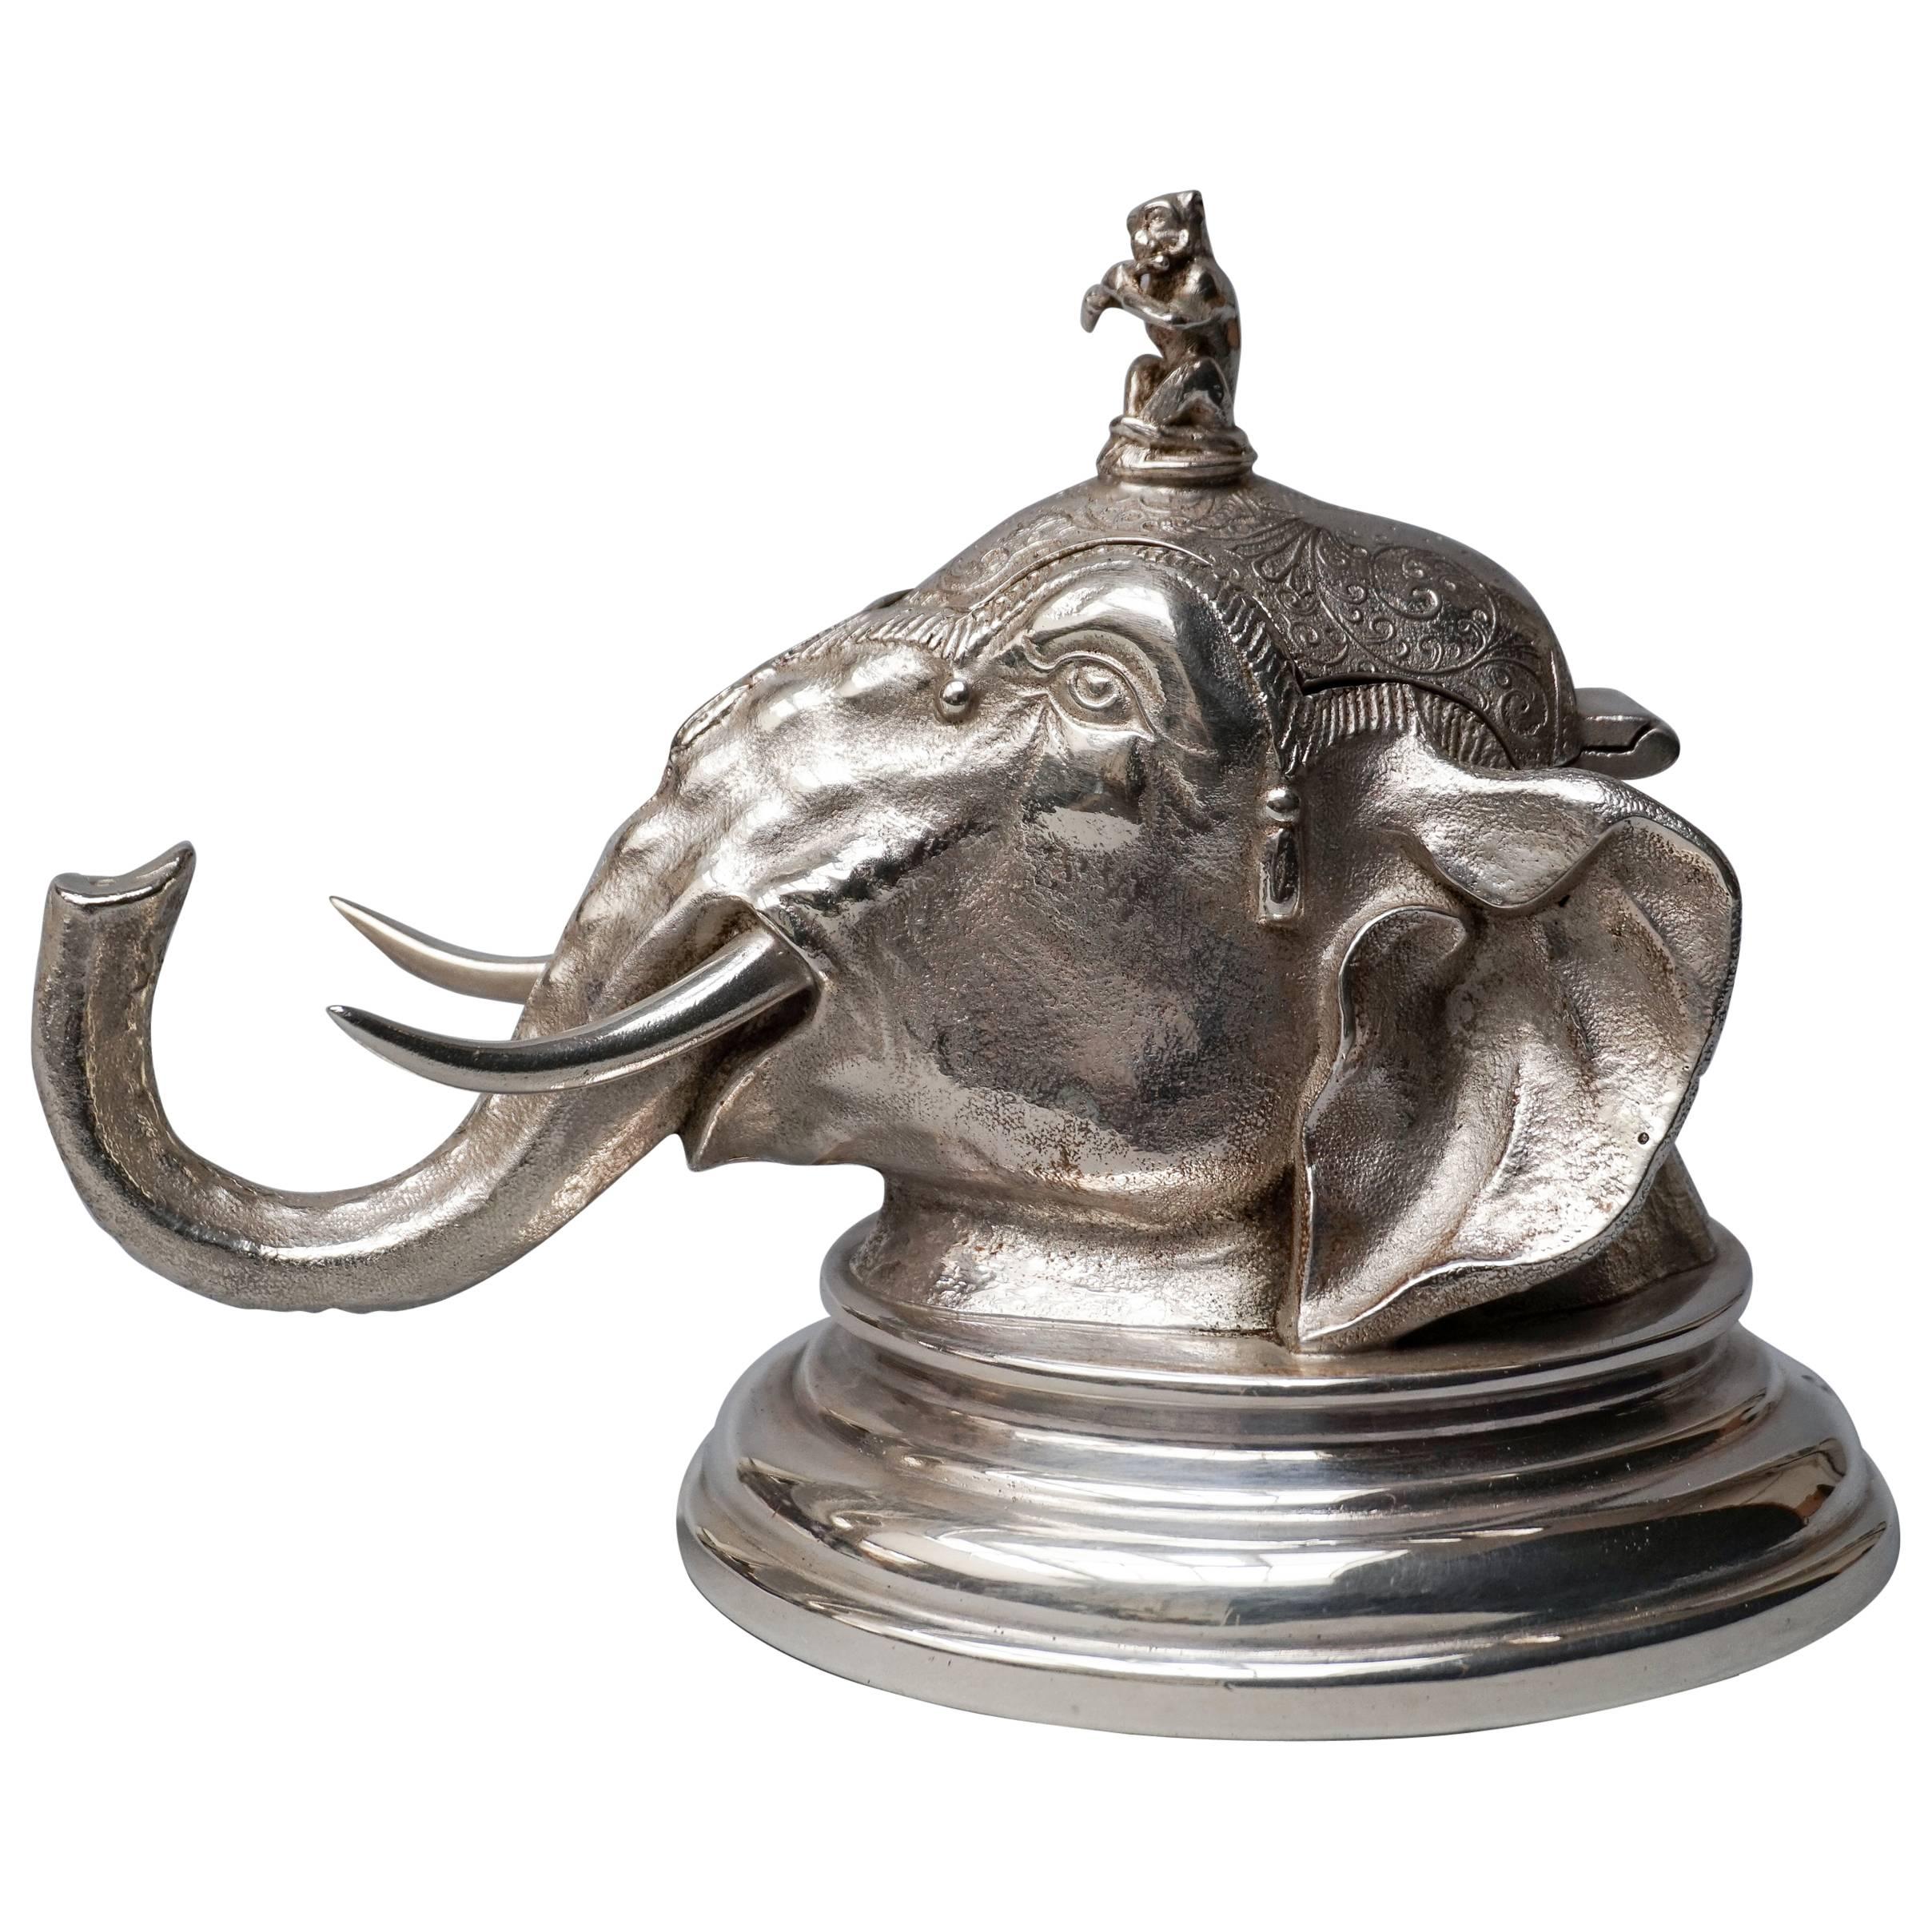 19th Century English Silver Plated Elephant Inkwell with Little Monkey